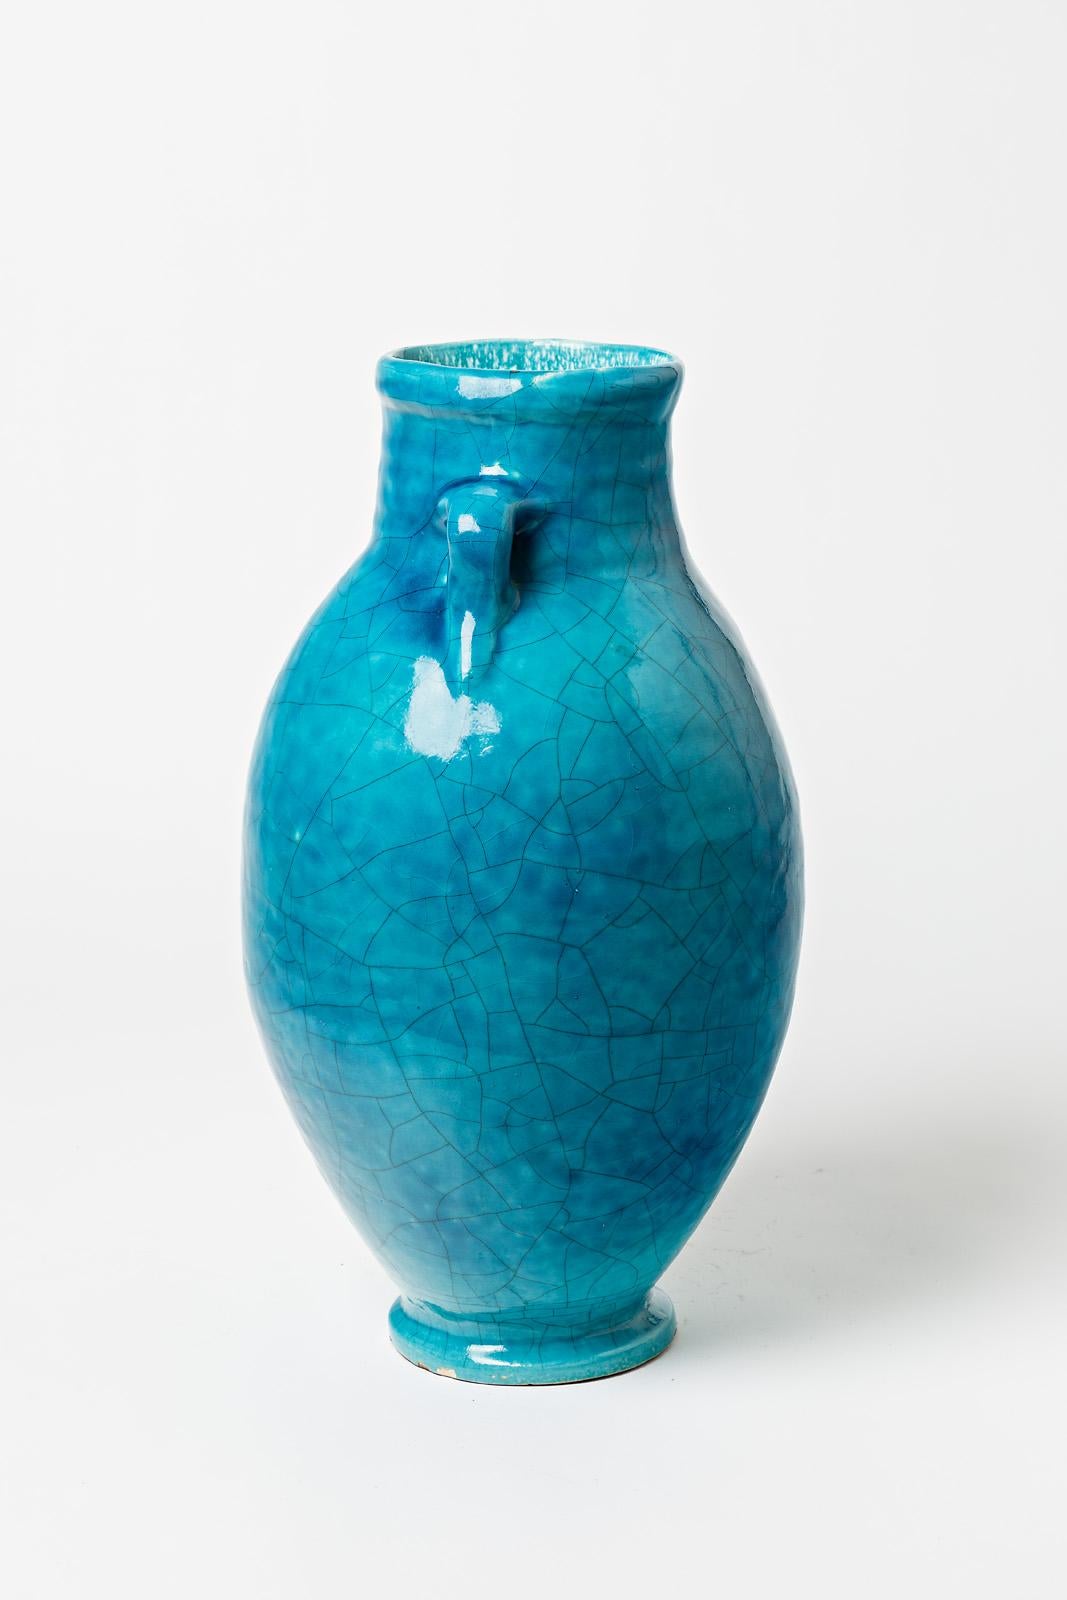 20th Century Blue glazed ceramic vase attributed to Raoul Lachenal, circa 1930. For Sale